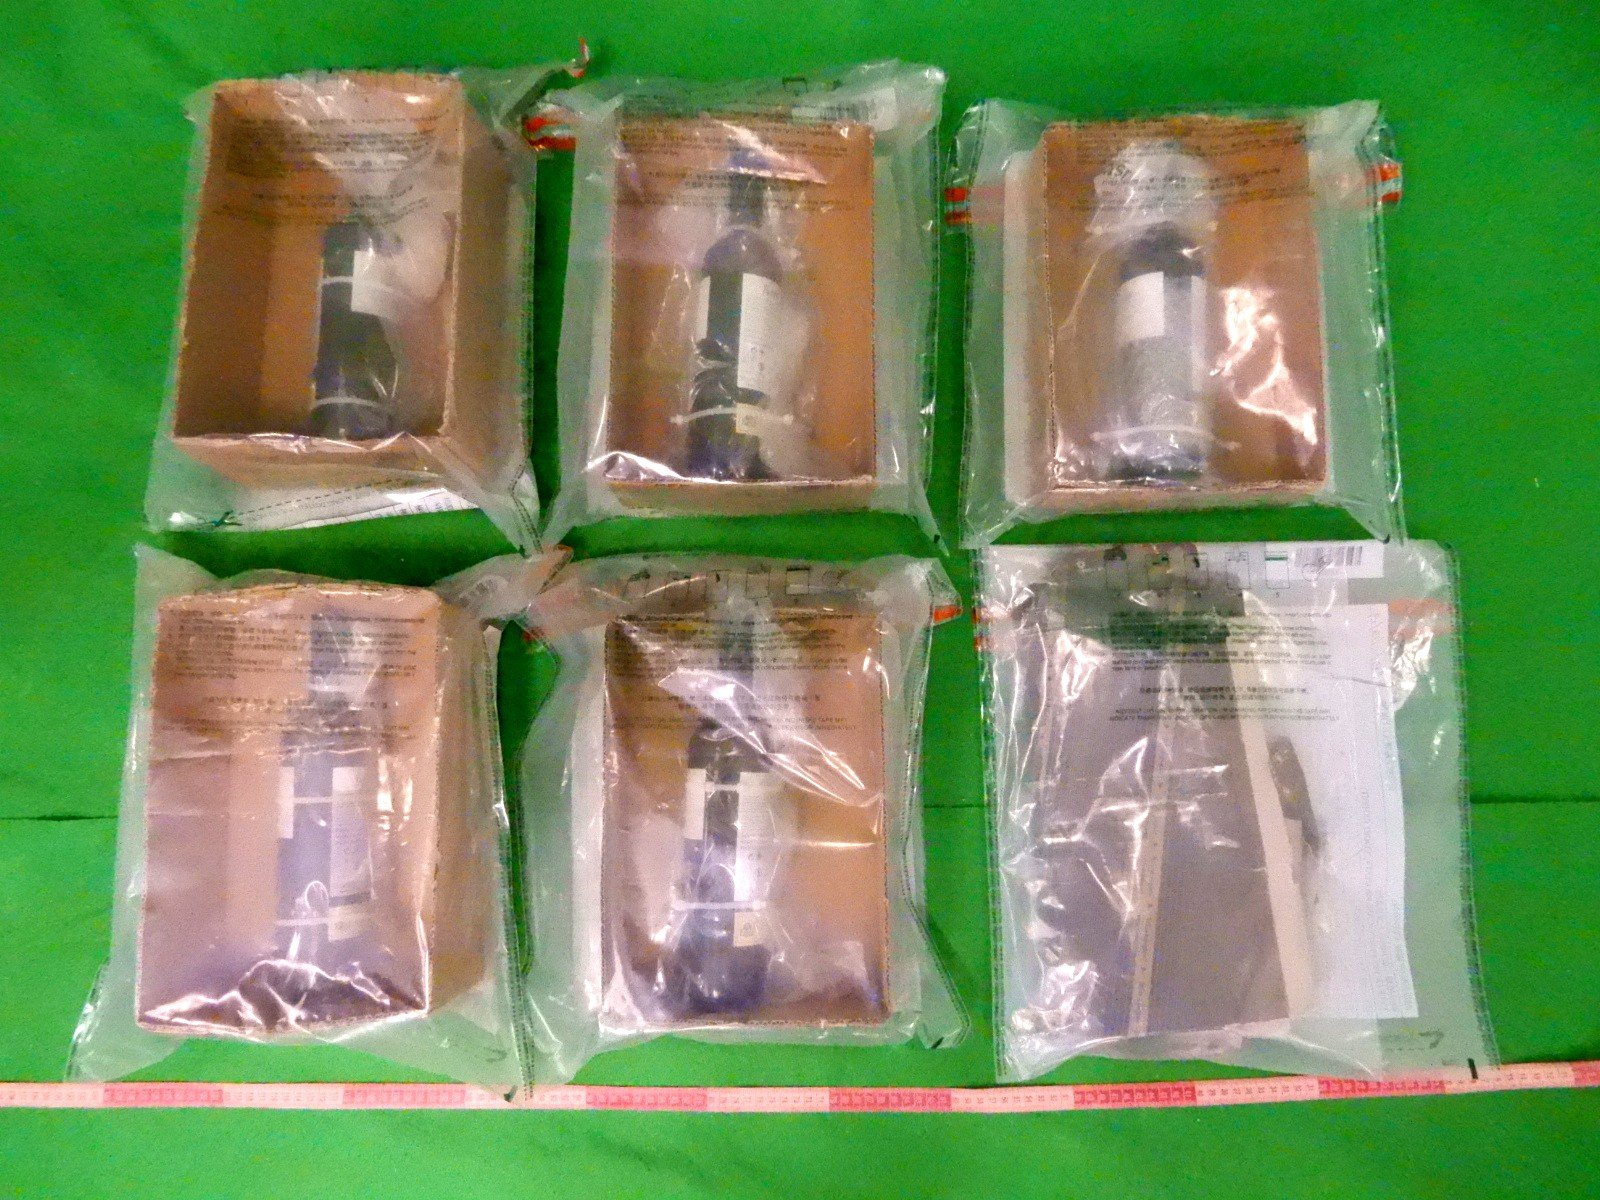 Customs officers seized wine bottles at Hong Kong International Airport containing four kilograms of suspected liquid cocaine with an estimated market value of about HK$4.8 million (US$615,000) during a comprehensive smuggling investigation. Photo: Handout